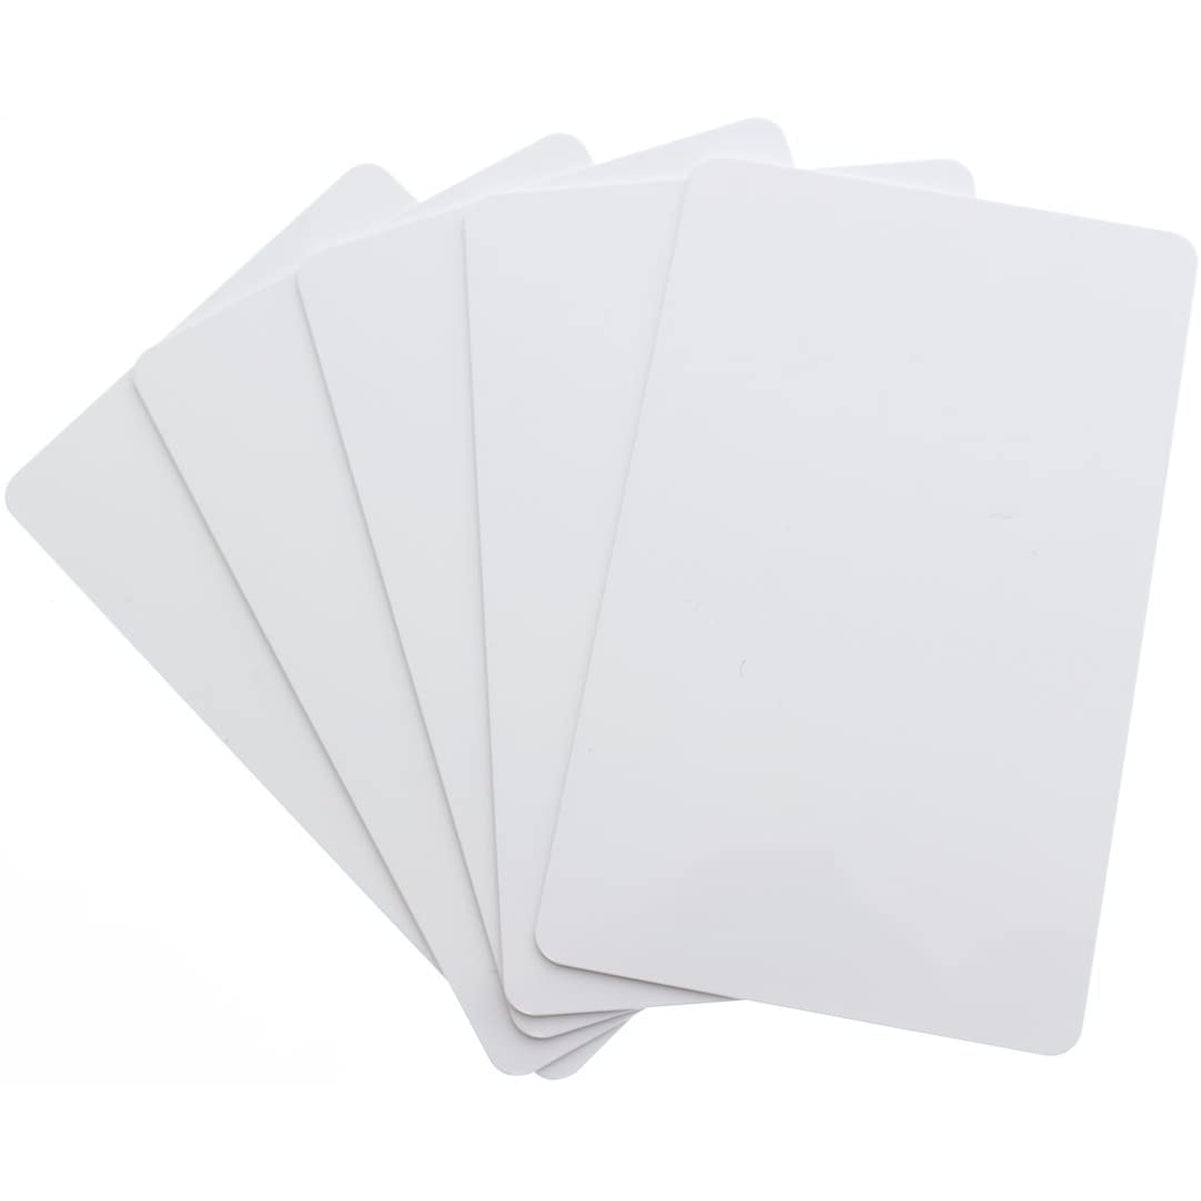 White PVC Cards, color cards, and more CR80 PVC Cards.